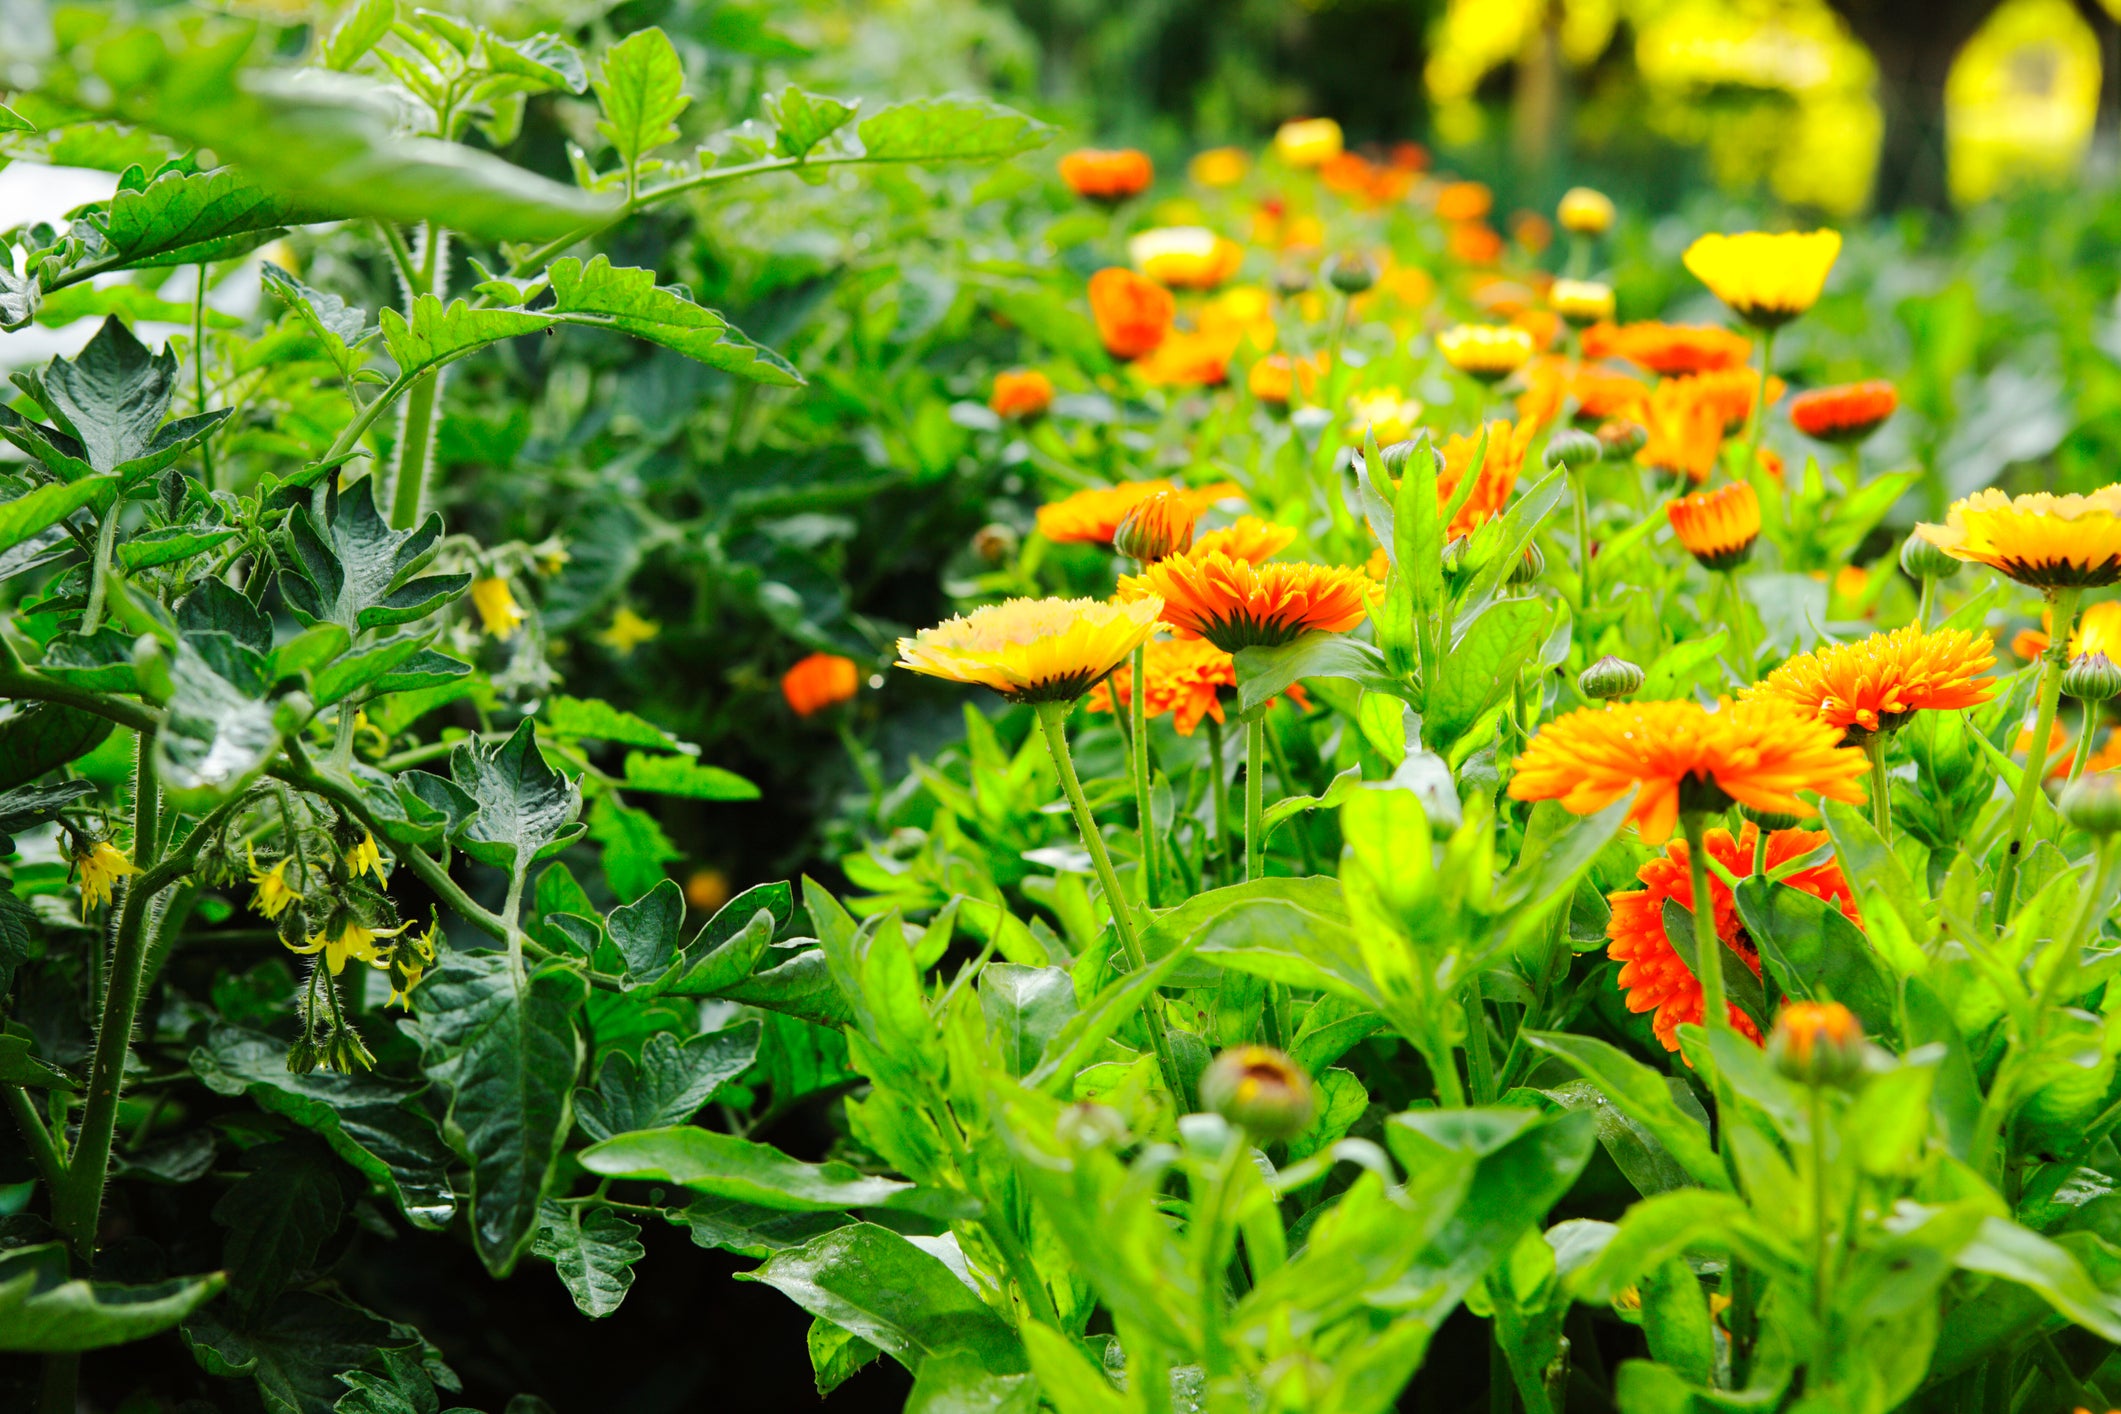 Companion planting involves growing specific plants next to each other